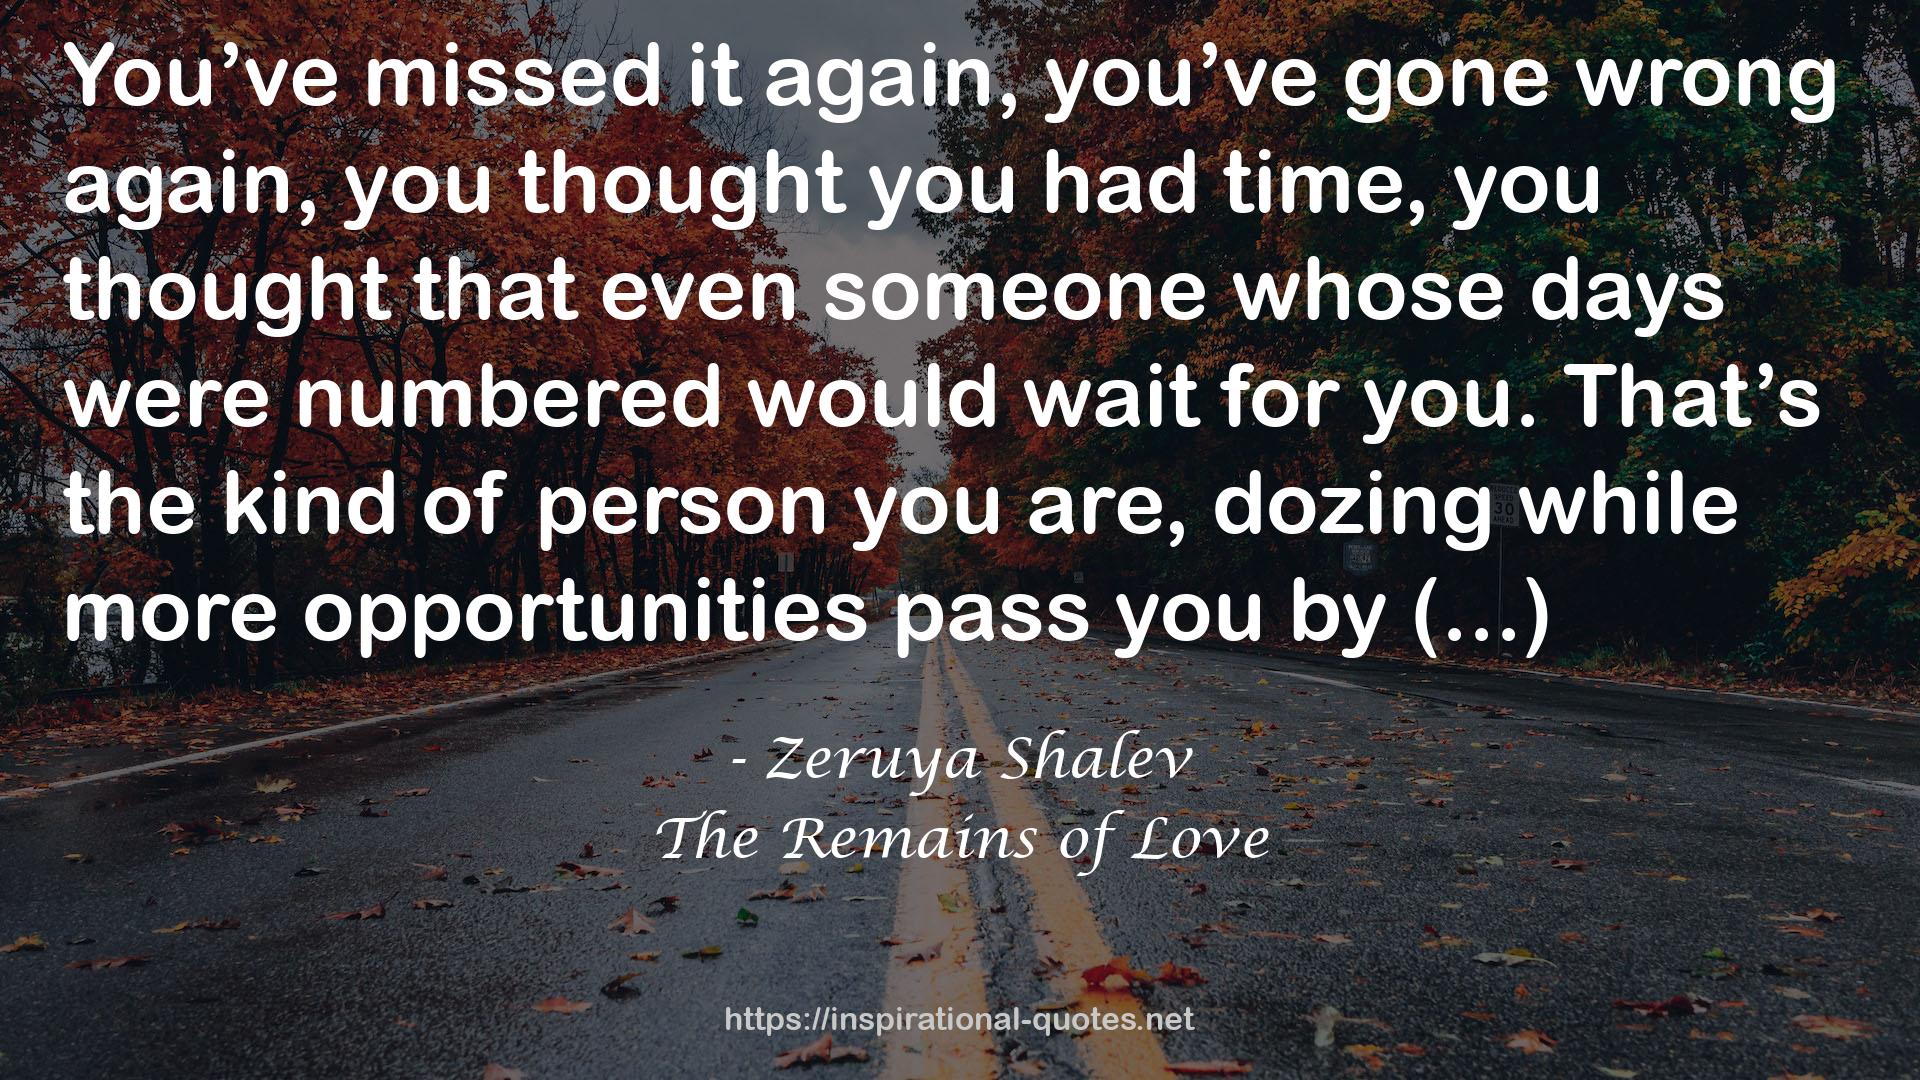 The Remains of Love QUOTES